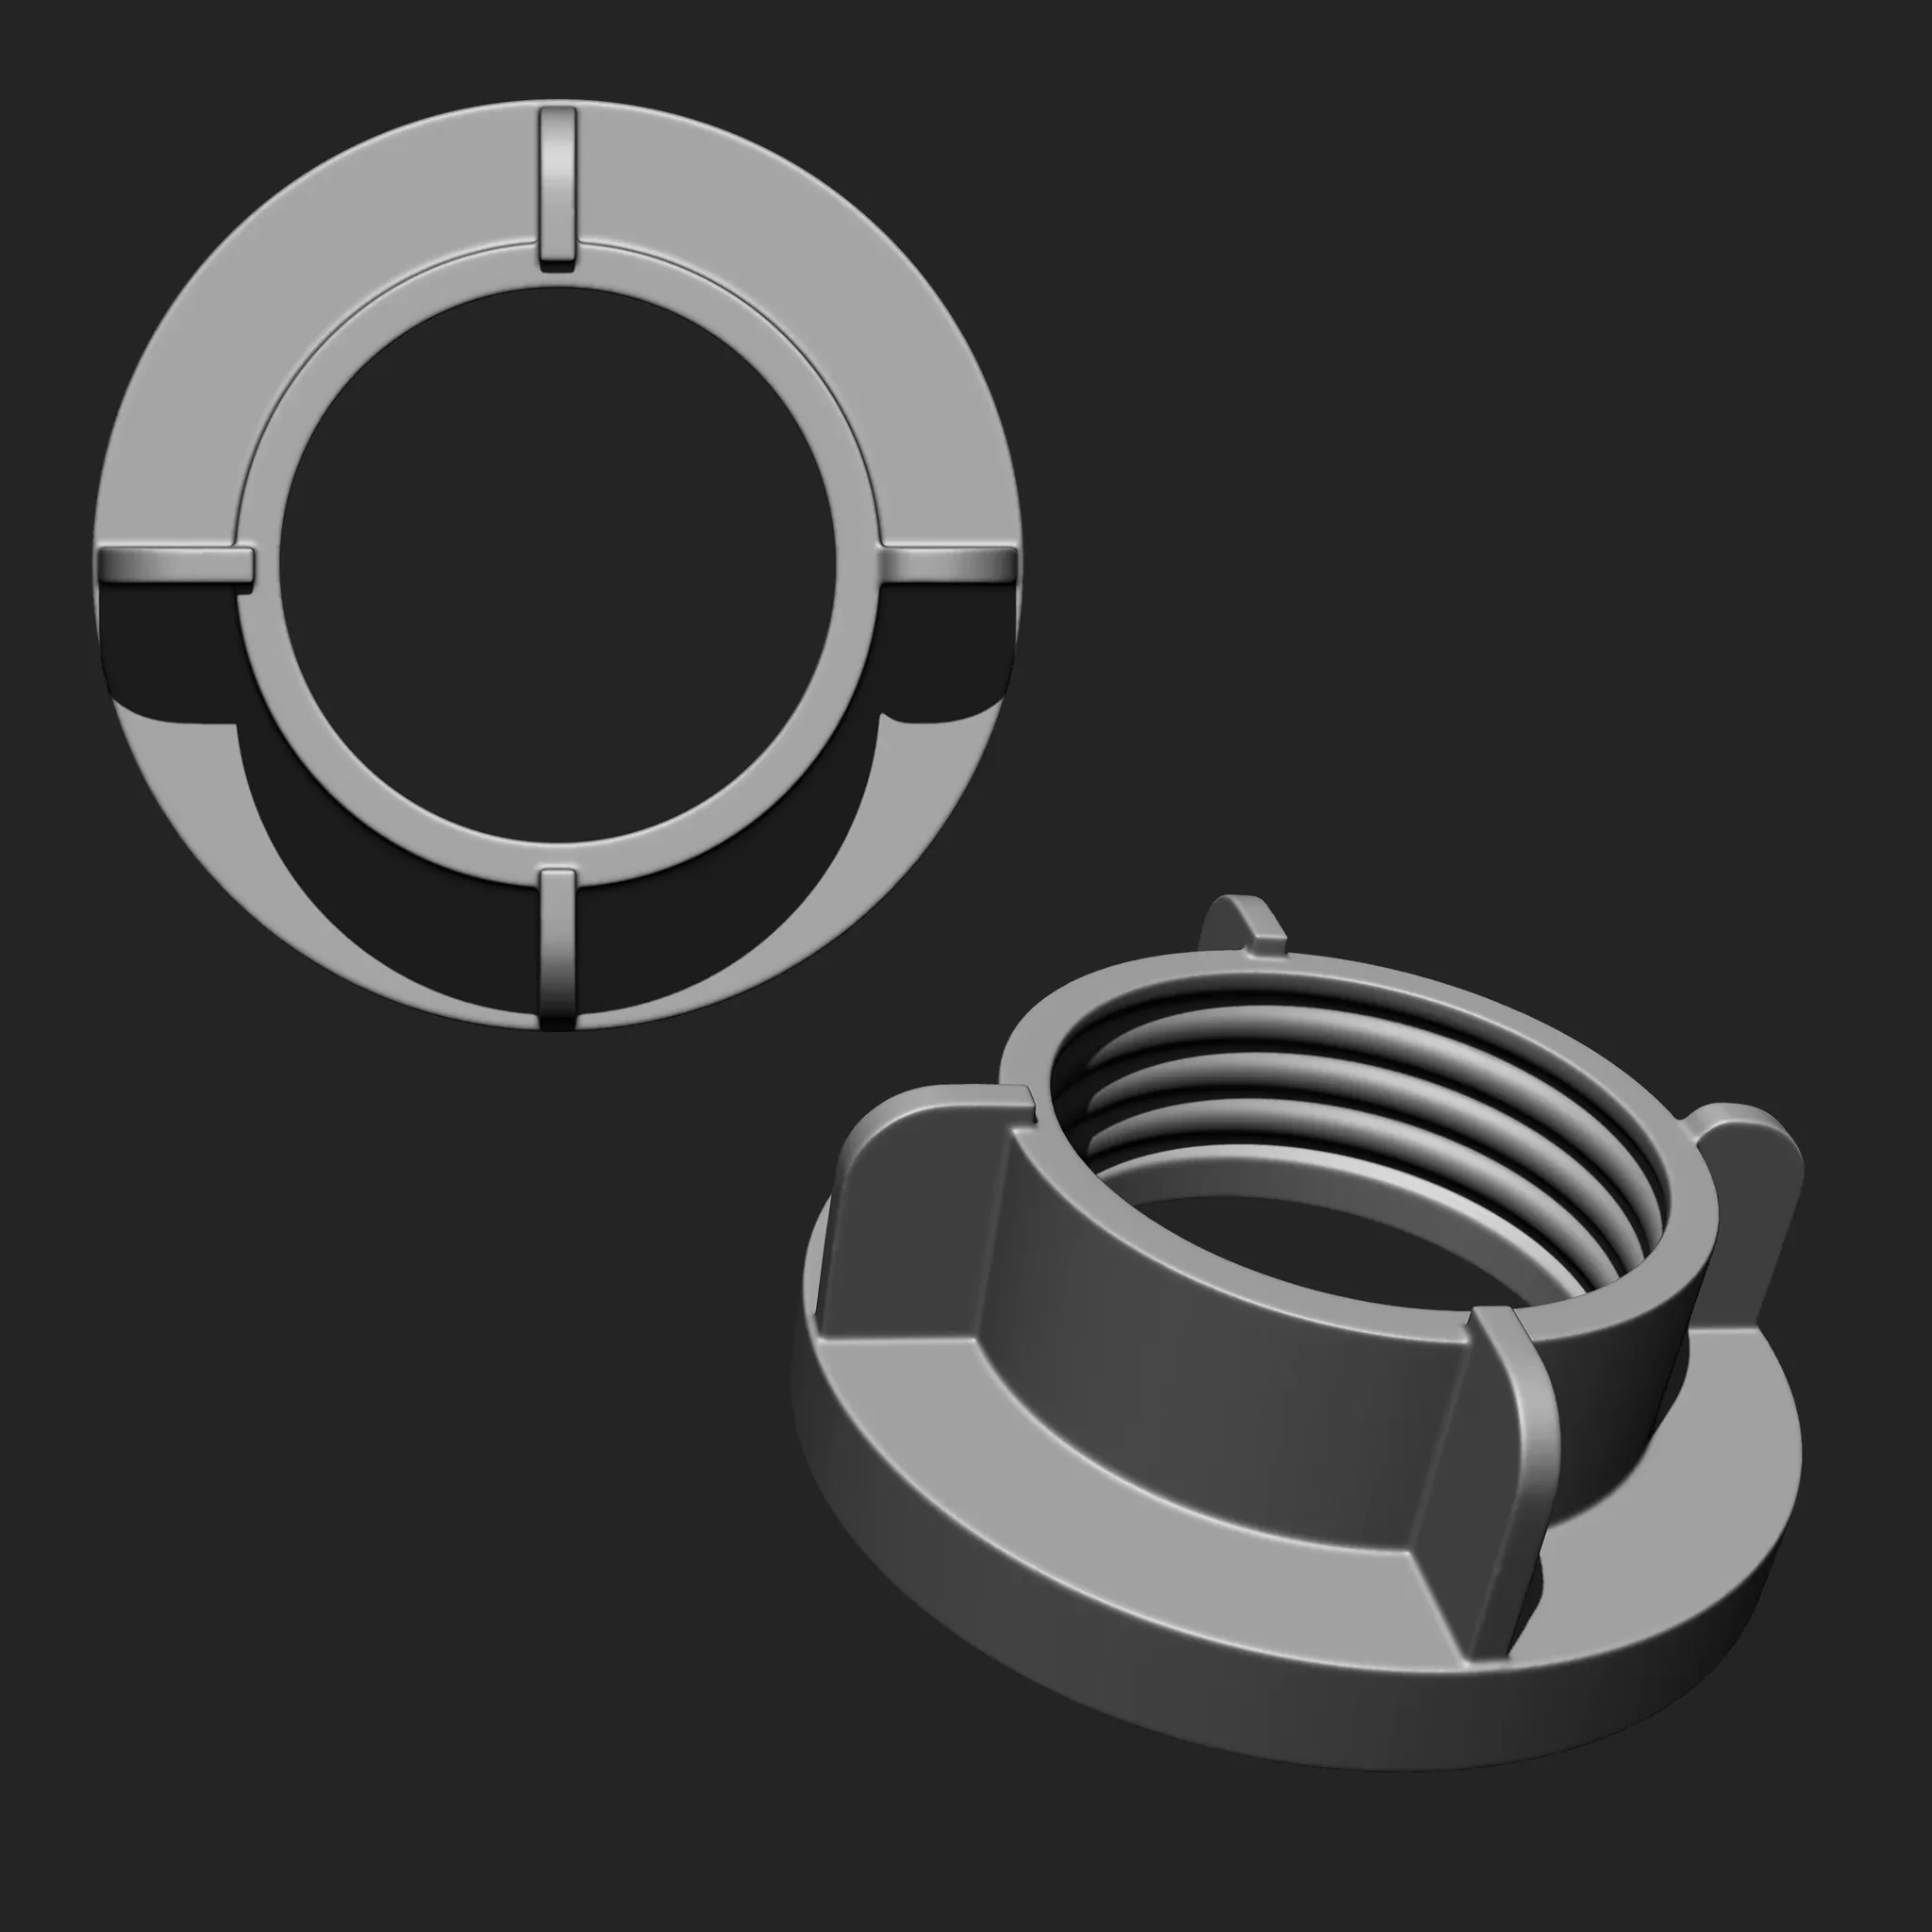 Plumbing Parts IMM Brush Pack (10 in One) Vol.4